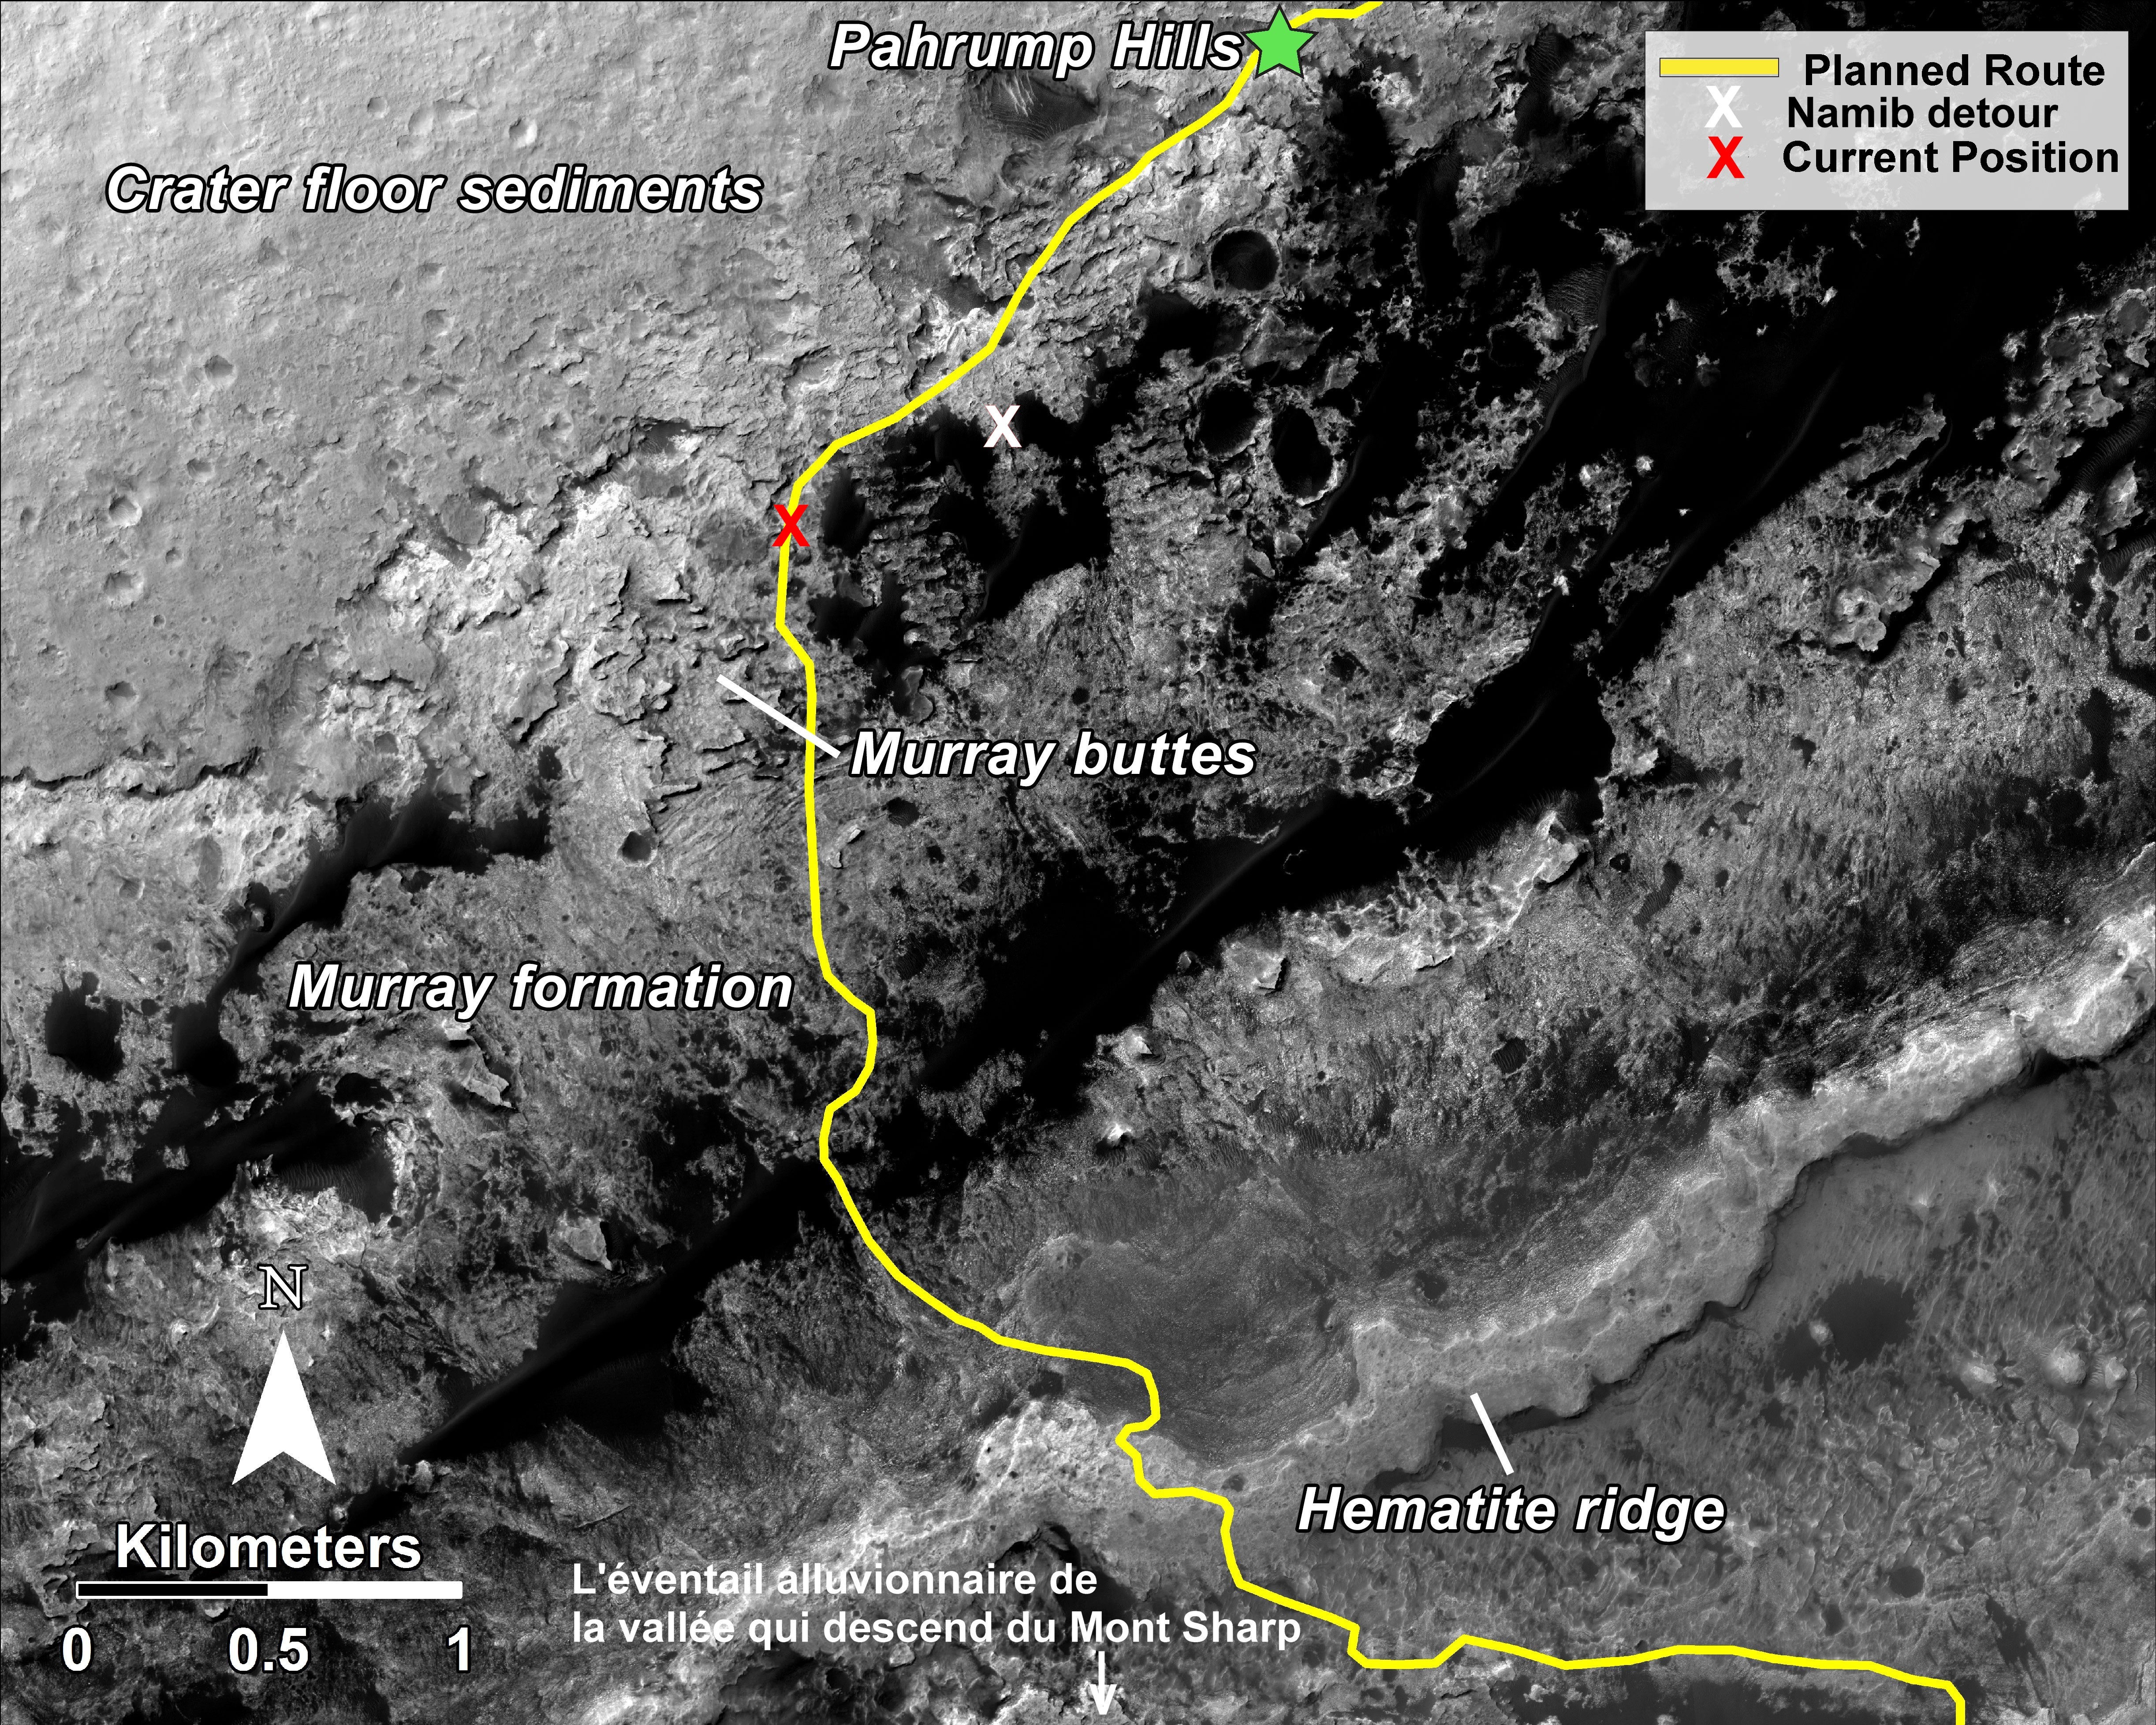 nasa-msl-mro-curiosity-rover-hirise-planned-route-map-pahrump-hills-to-mount-sharp-pia18780-full-renseigné-1 7 16